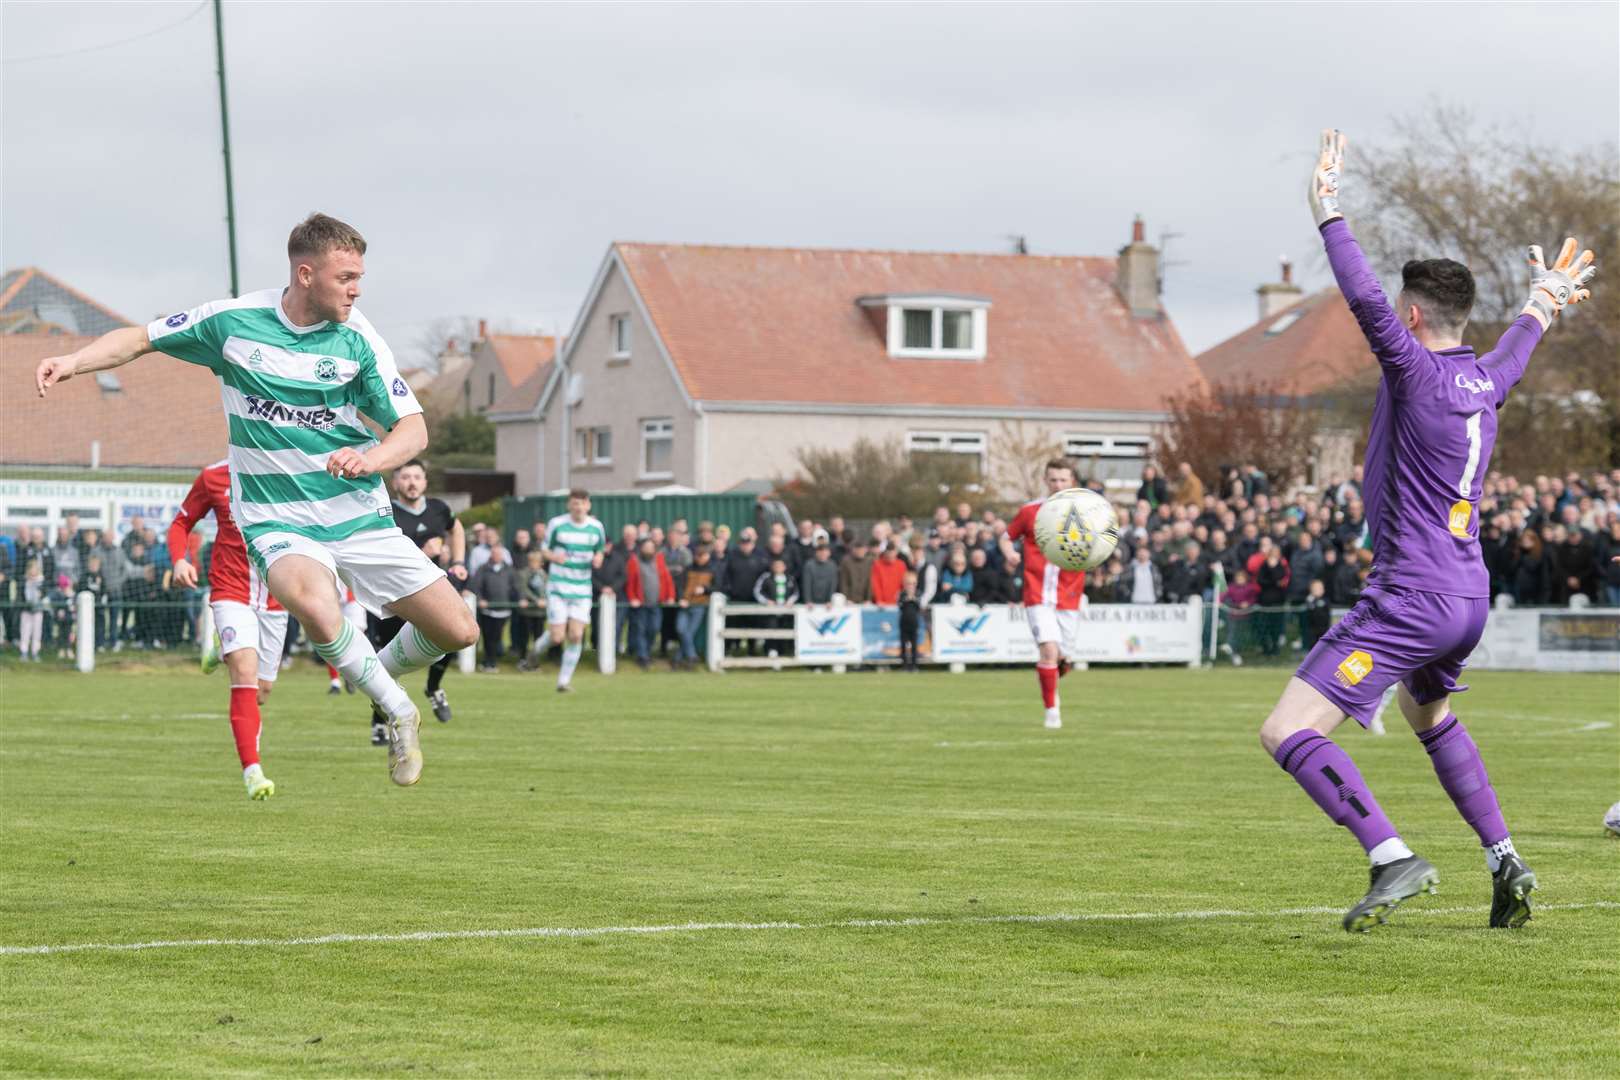 Buckie's Josh Peters making a solid attempt for goal. ..Buckie Thistle F.C. v Brechin City F.C. Highland League Final at Victoria Park. ..Picture: Beth Taylor.